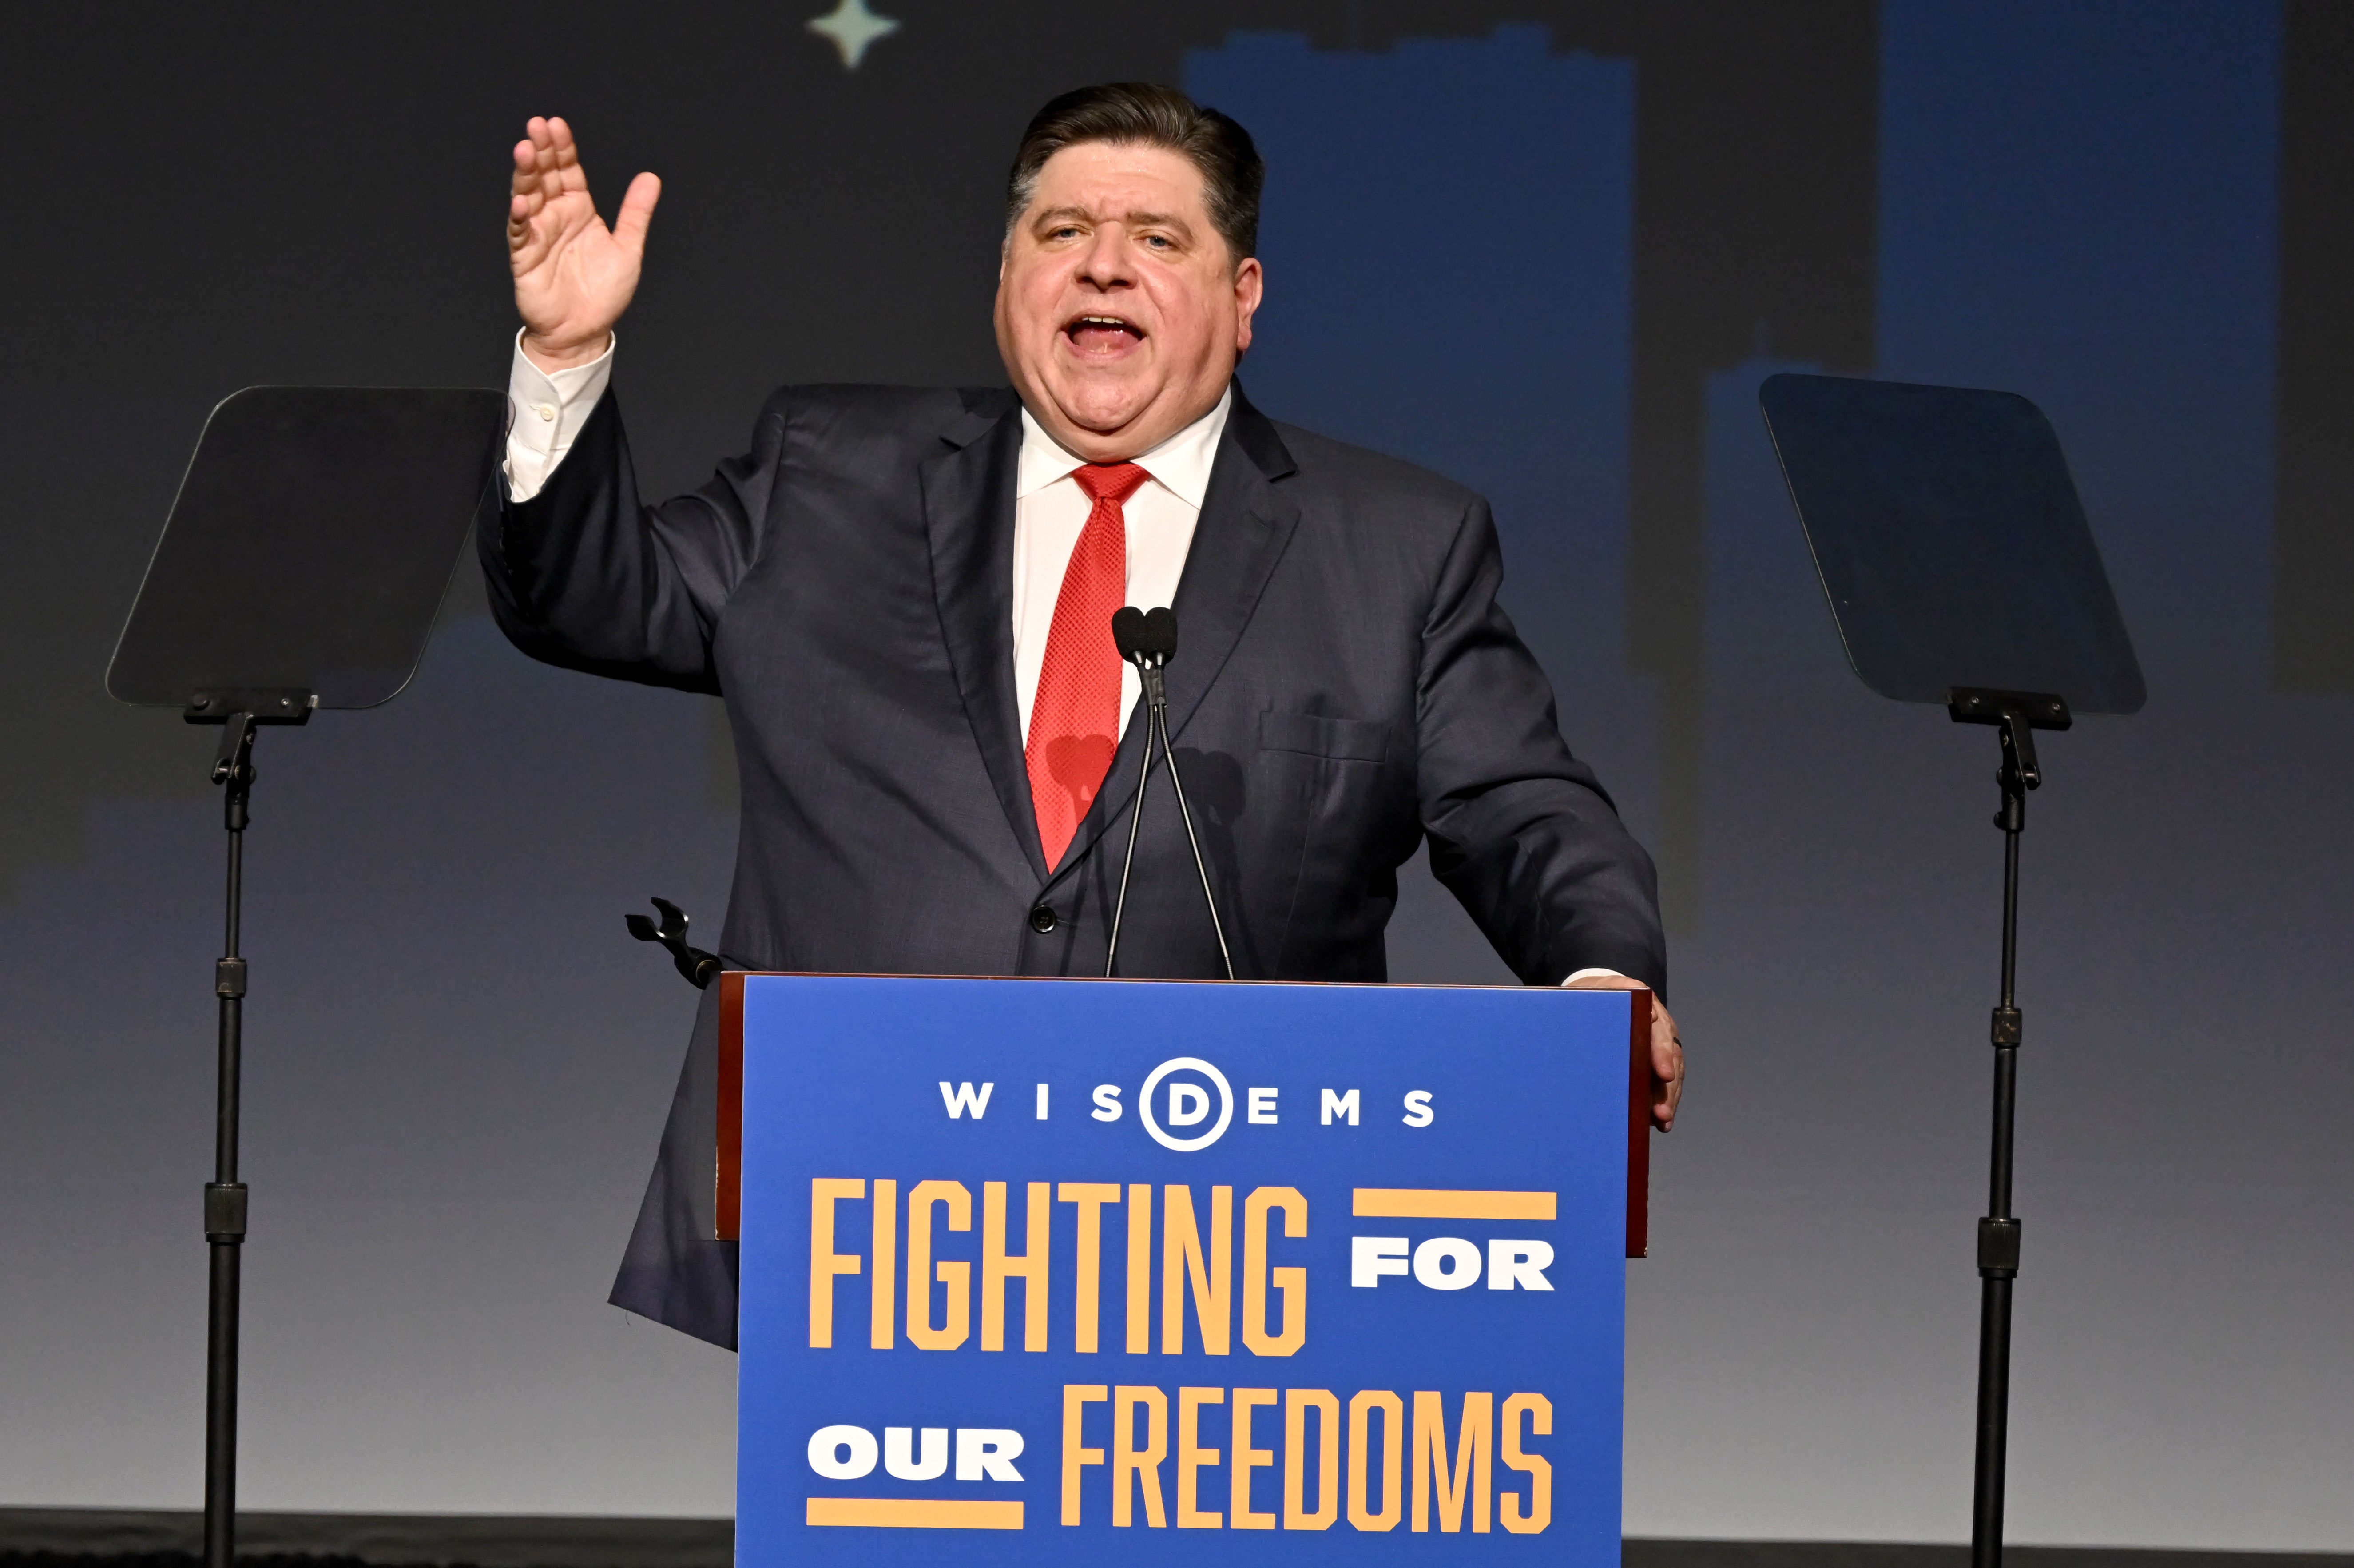 JB Pritzker won a crowded 2018 primary to become the Democratic nominee for governor in Illinois